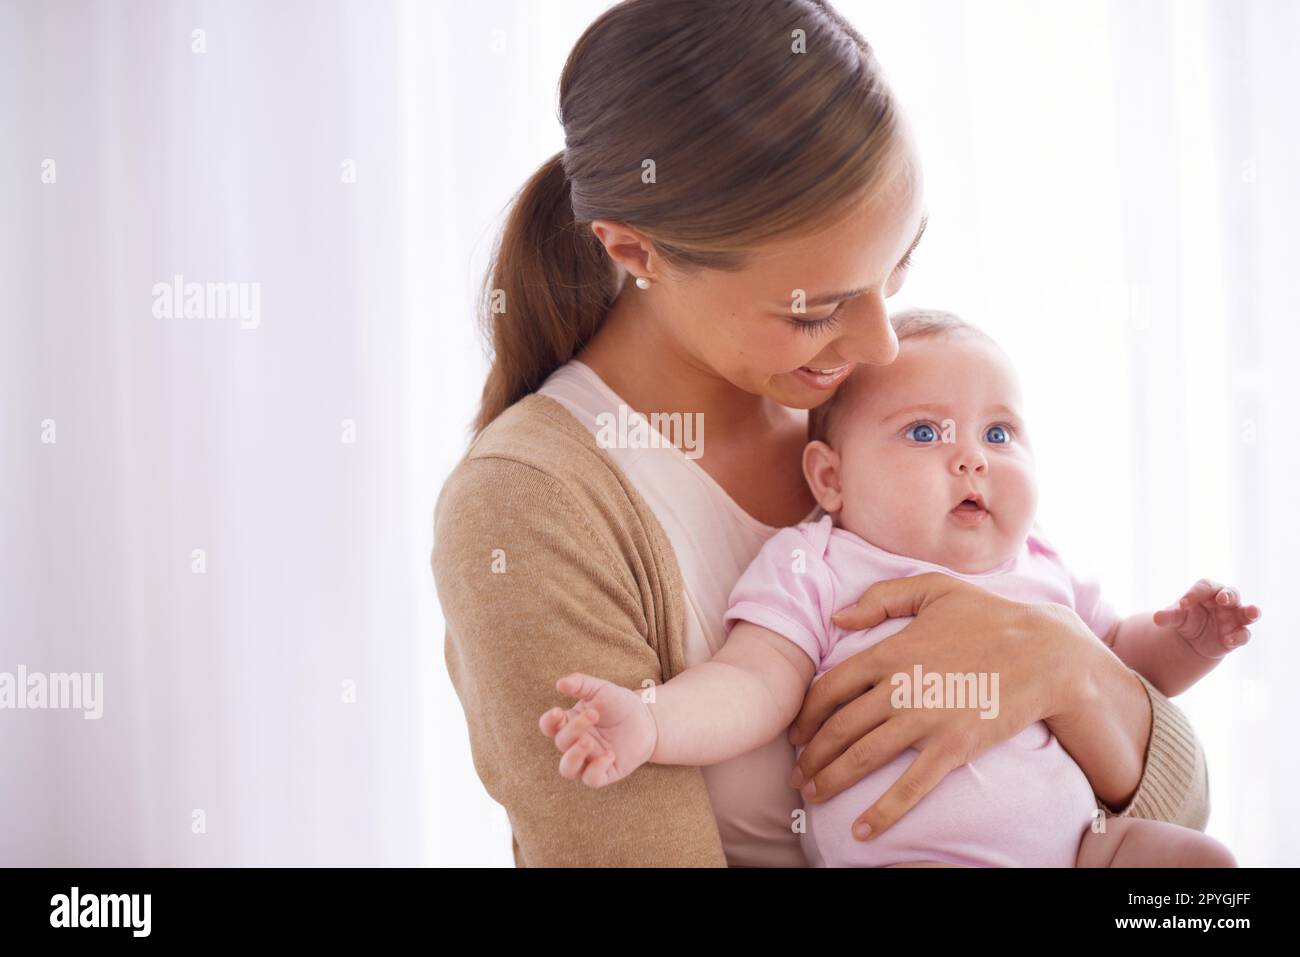 Shes such a bundle of joy. a young mother bonding with her baby girl. Stock Photo